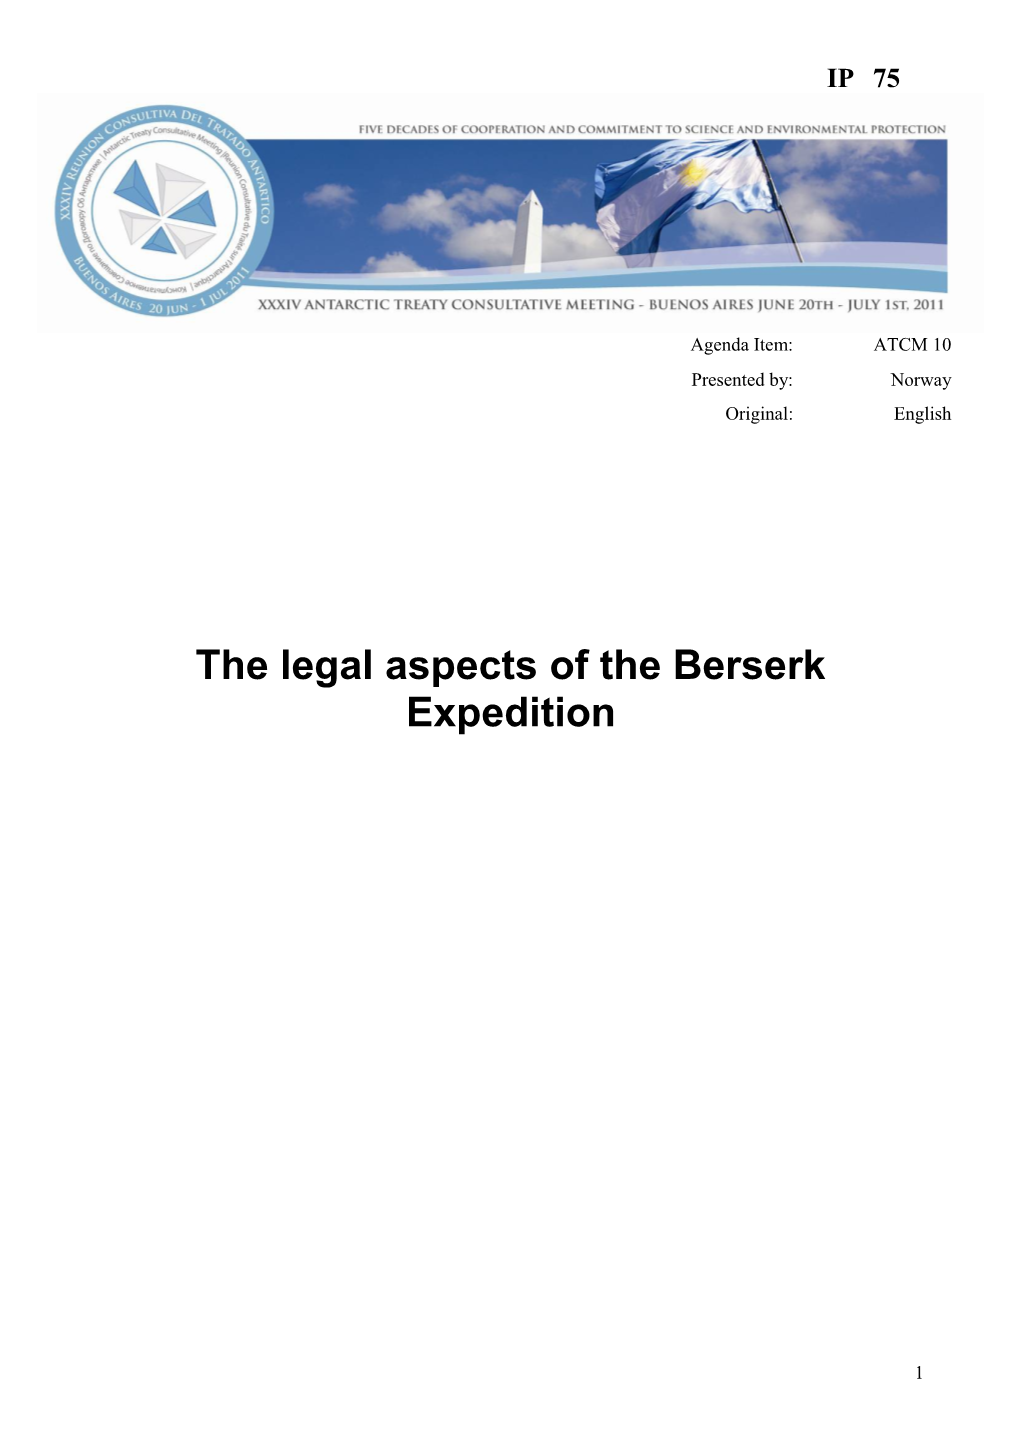 The Legal Aspects of the Berserk Expedition